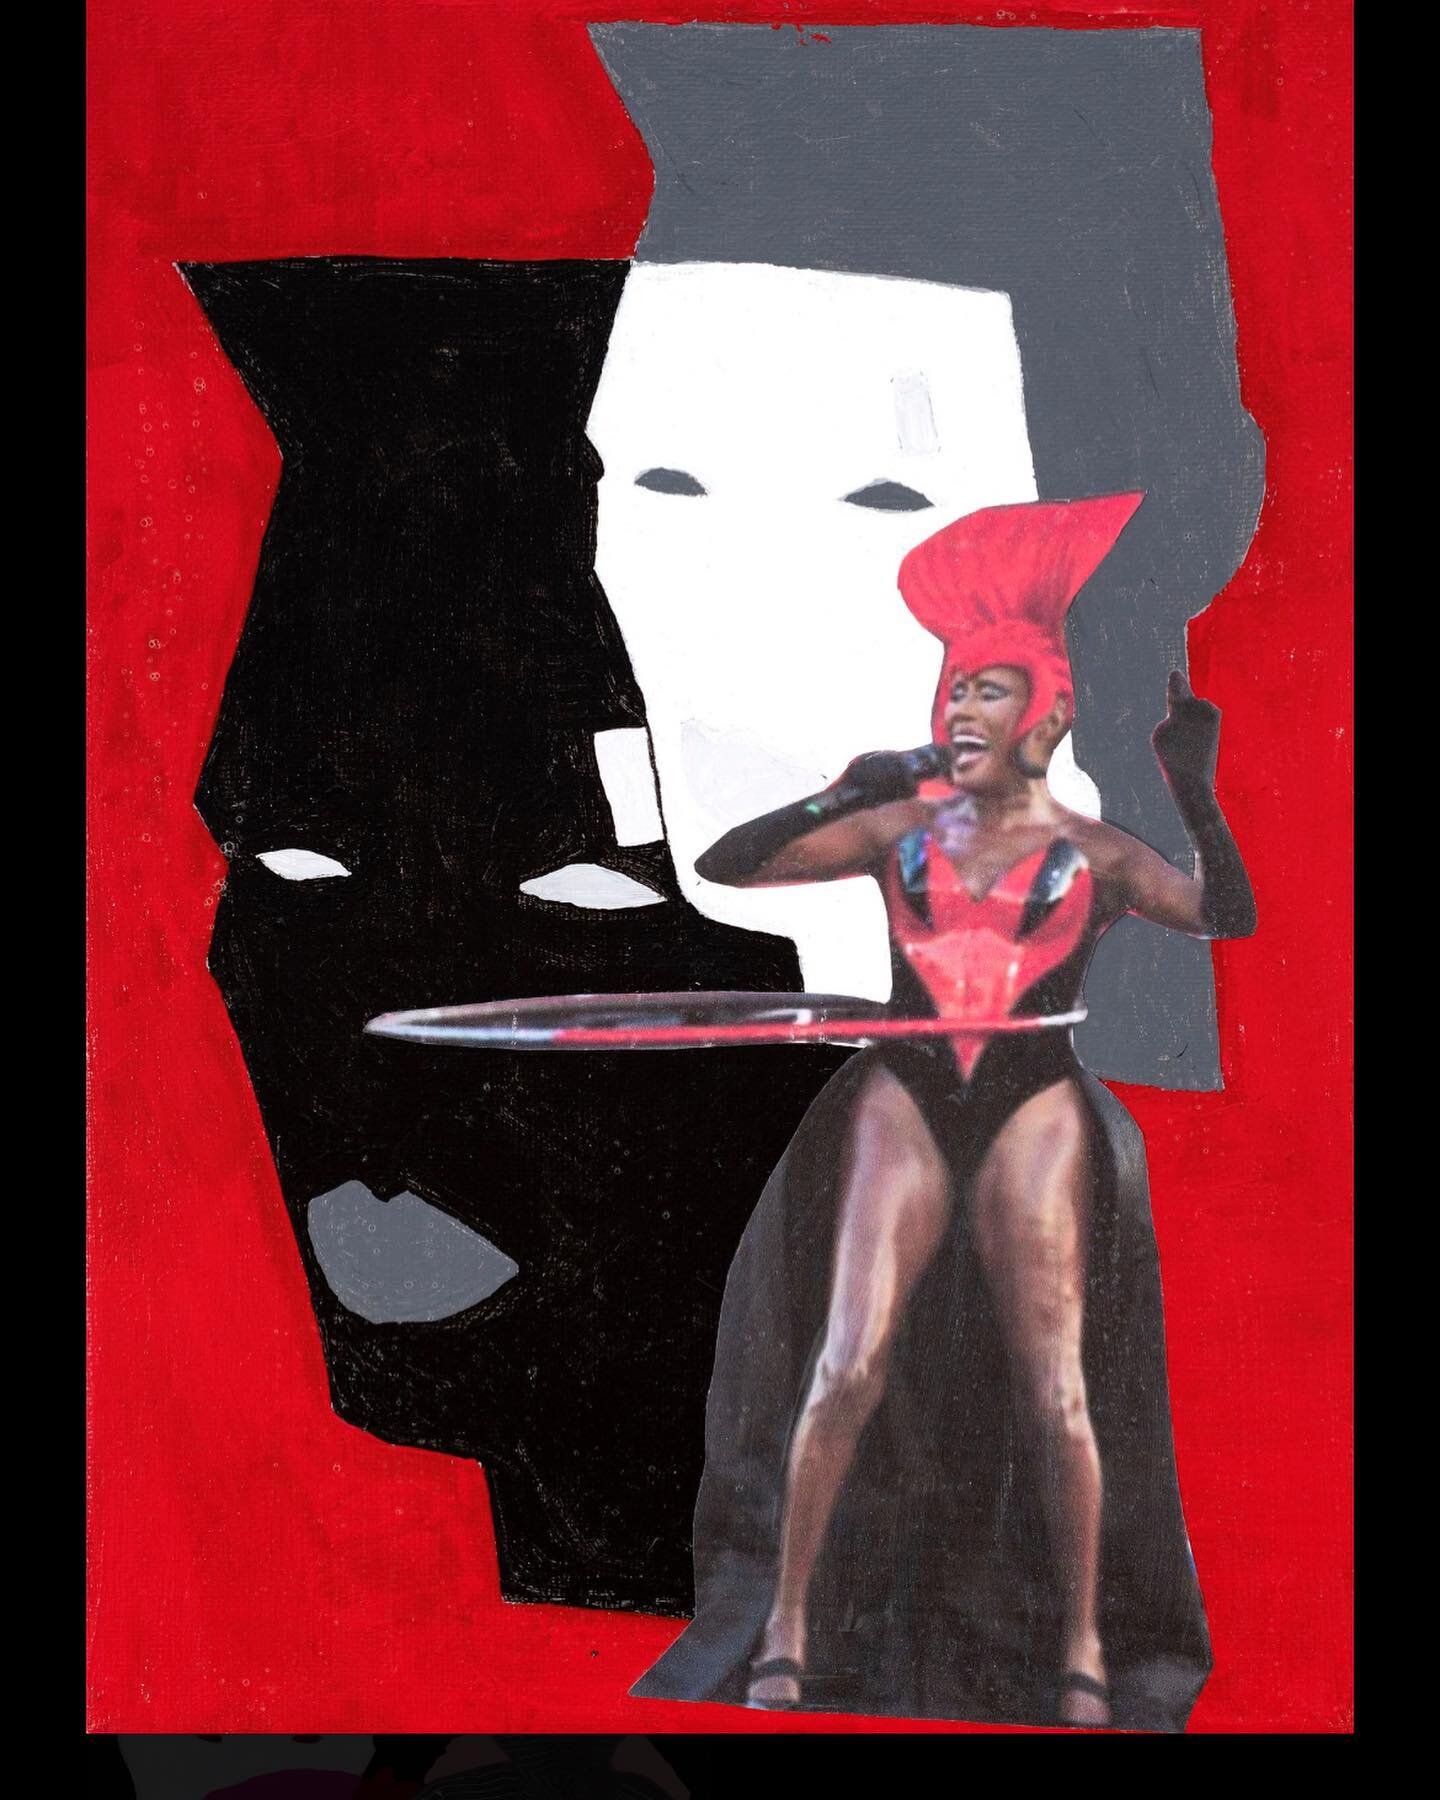 HAPPY BIRTHDAY MISS GRACE JONES!!&hearts;️I&rsquo;m working on some new Grace collages today, playing her music loud, of course!!! This is one from my &lsquo;heros&rsquo; section of my website&hellip; SLAVE TO THE RHYTHM H30 x W20&hellip; original pa